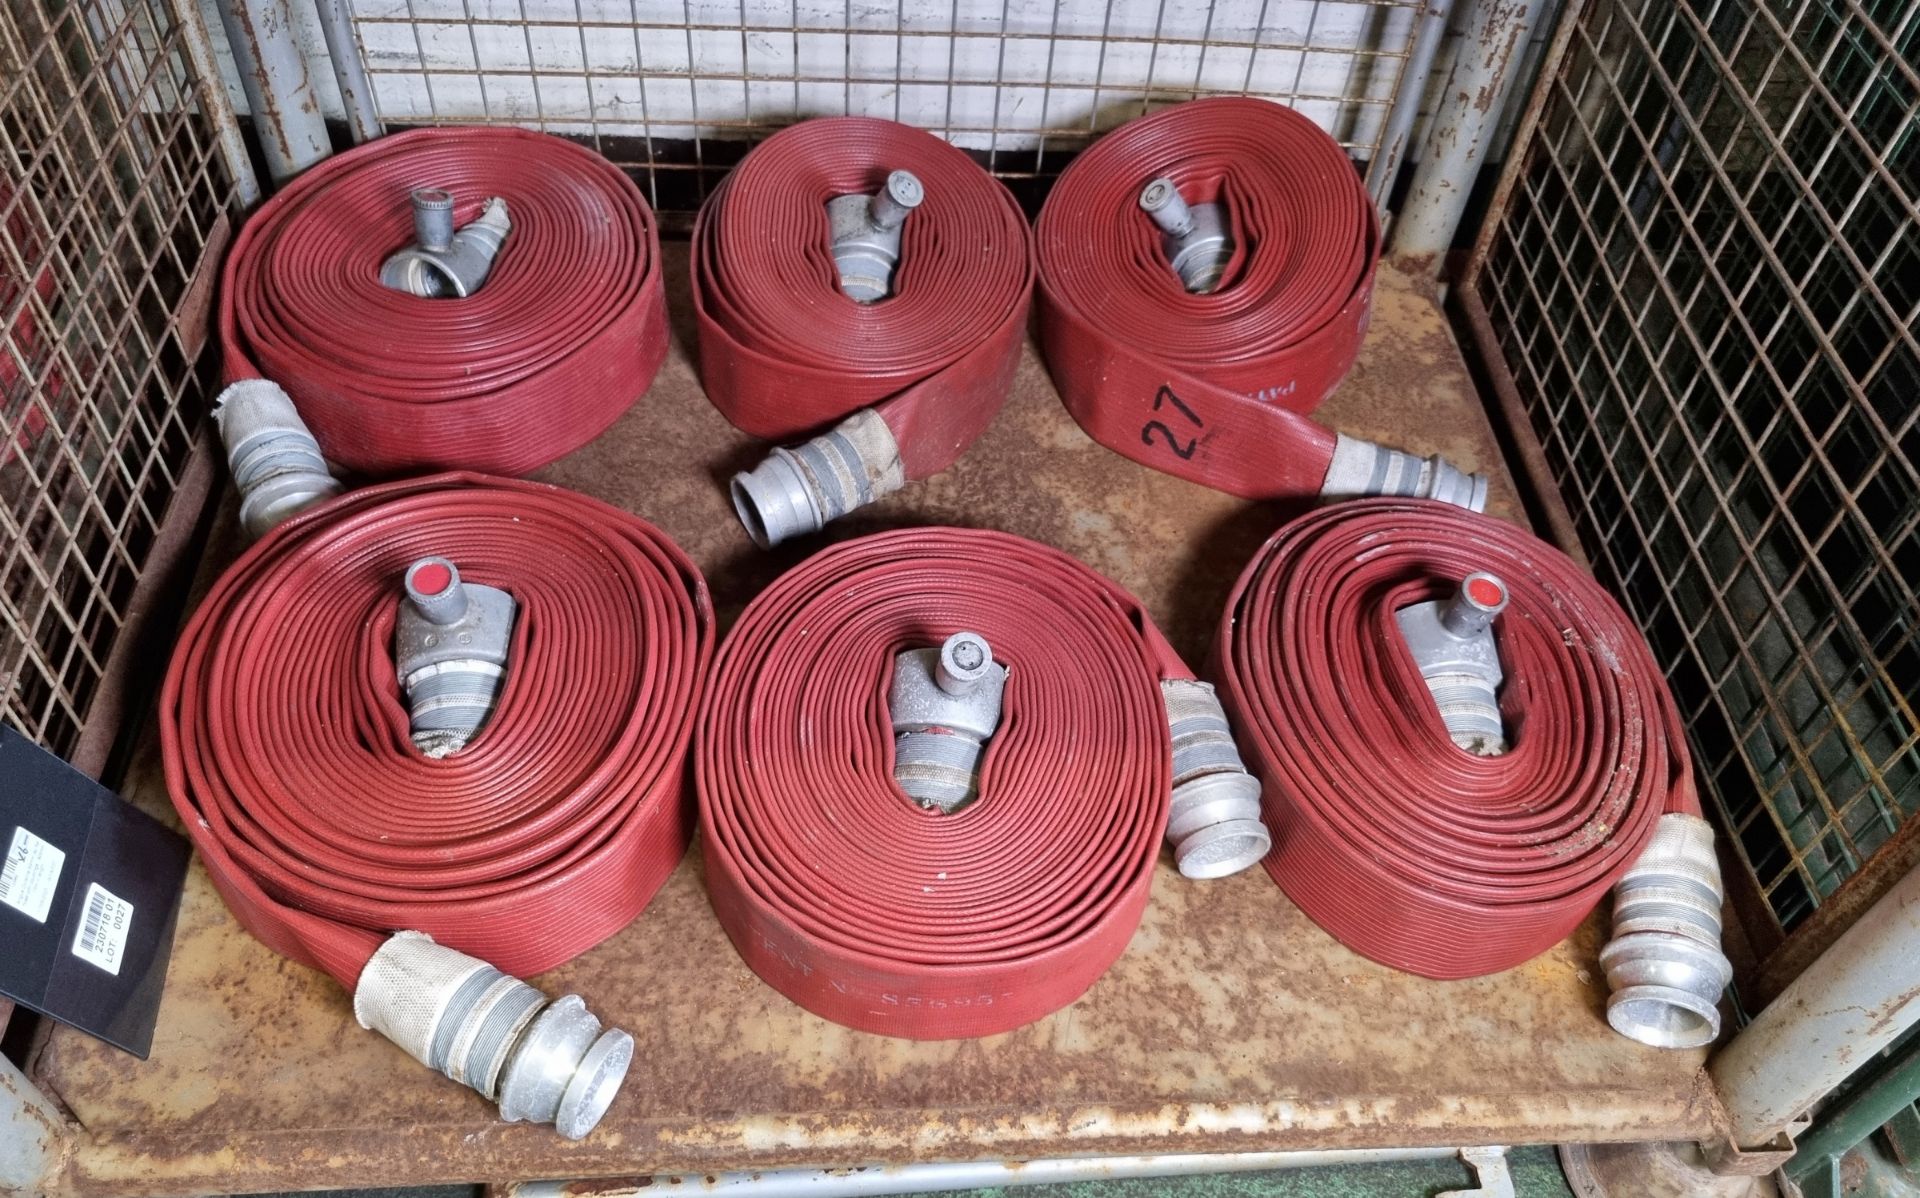 6x Angus Duraline 64mm lay flat hoses with couplings - approx 15m in length - Image 2 of 5